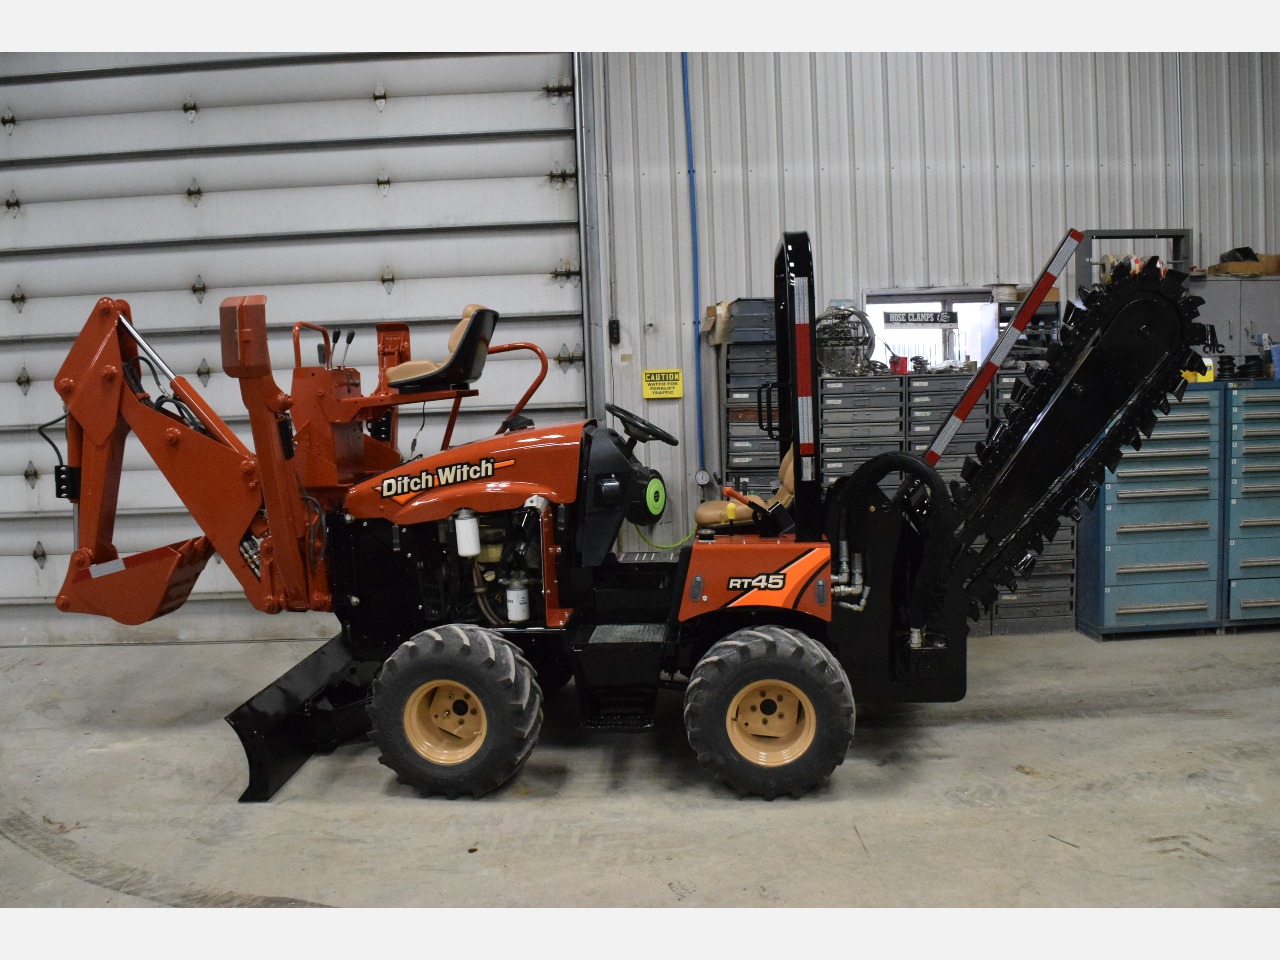 2020 DITCH WITCH rt45 Ride-On Trencher #1